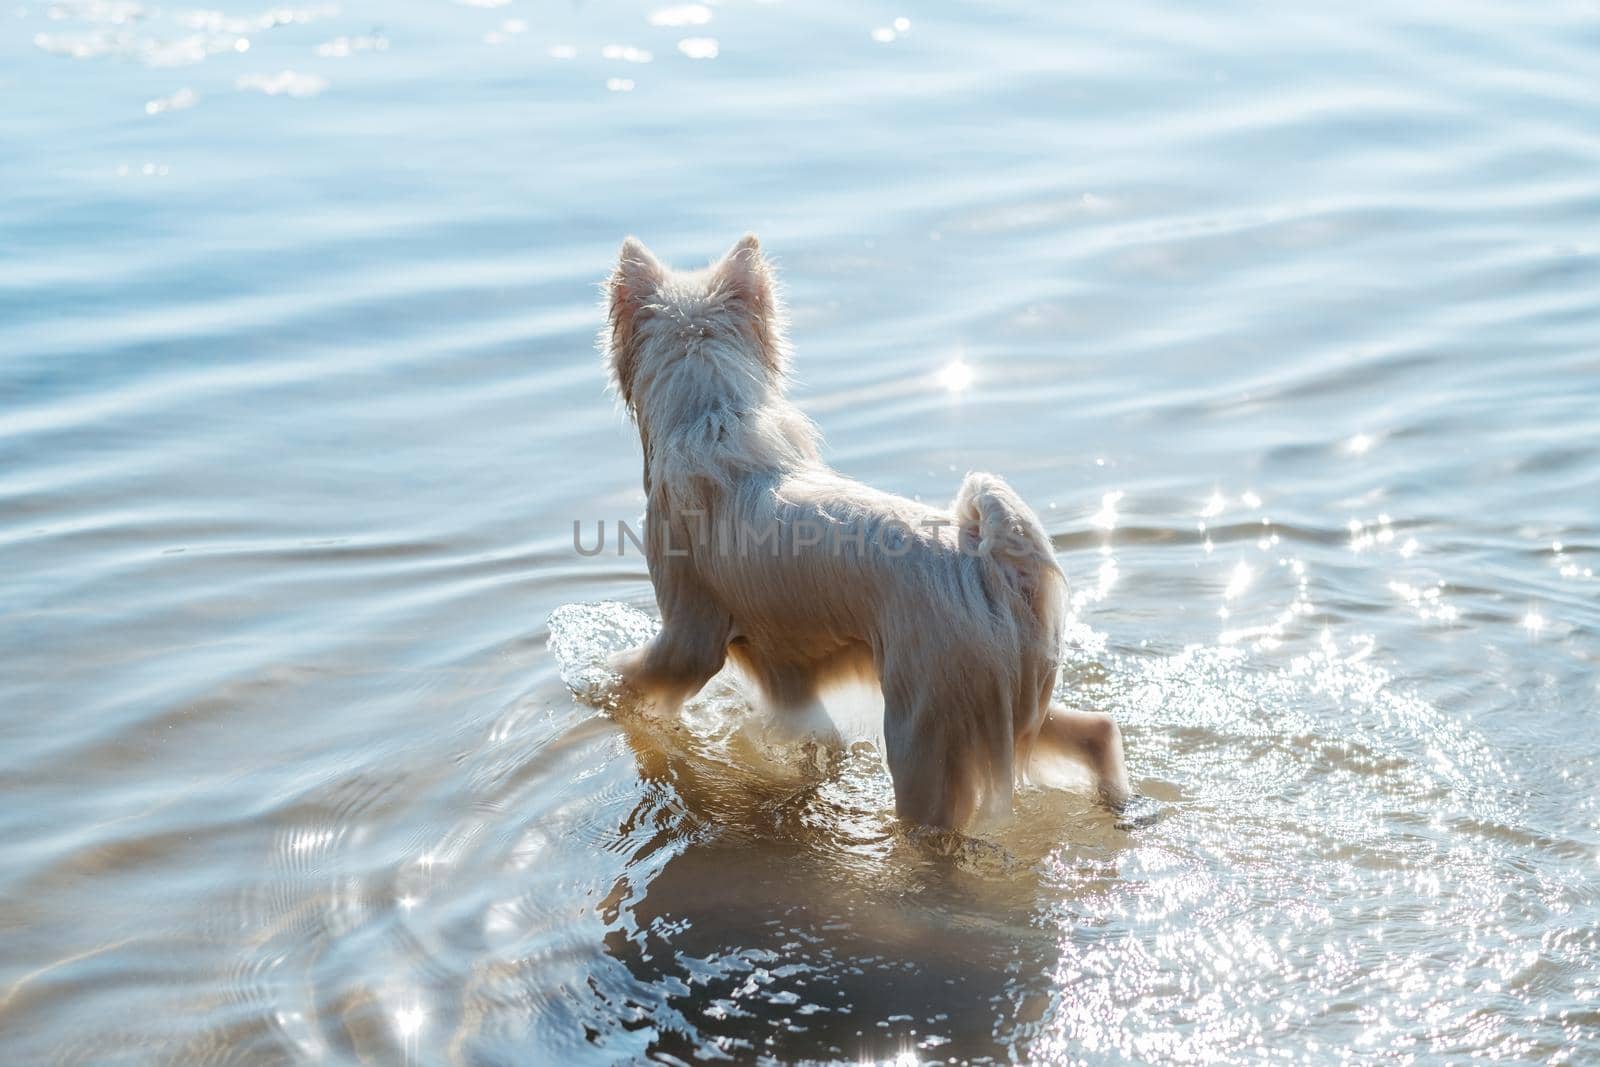 Snow-White Dog Breed Japanese Spitz Walking in the Lake Water, Sunlight Blinks on the Surface by Romvy